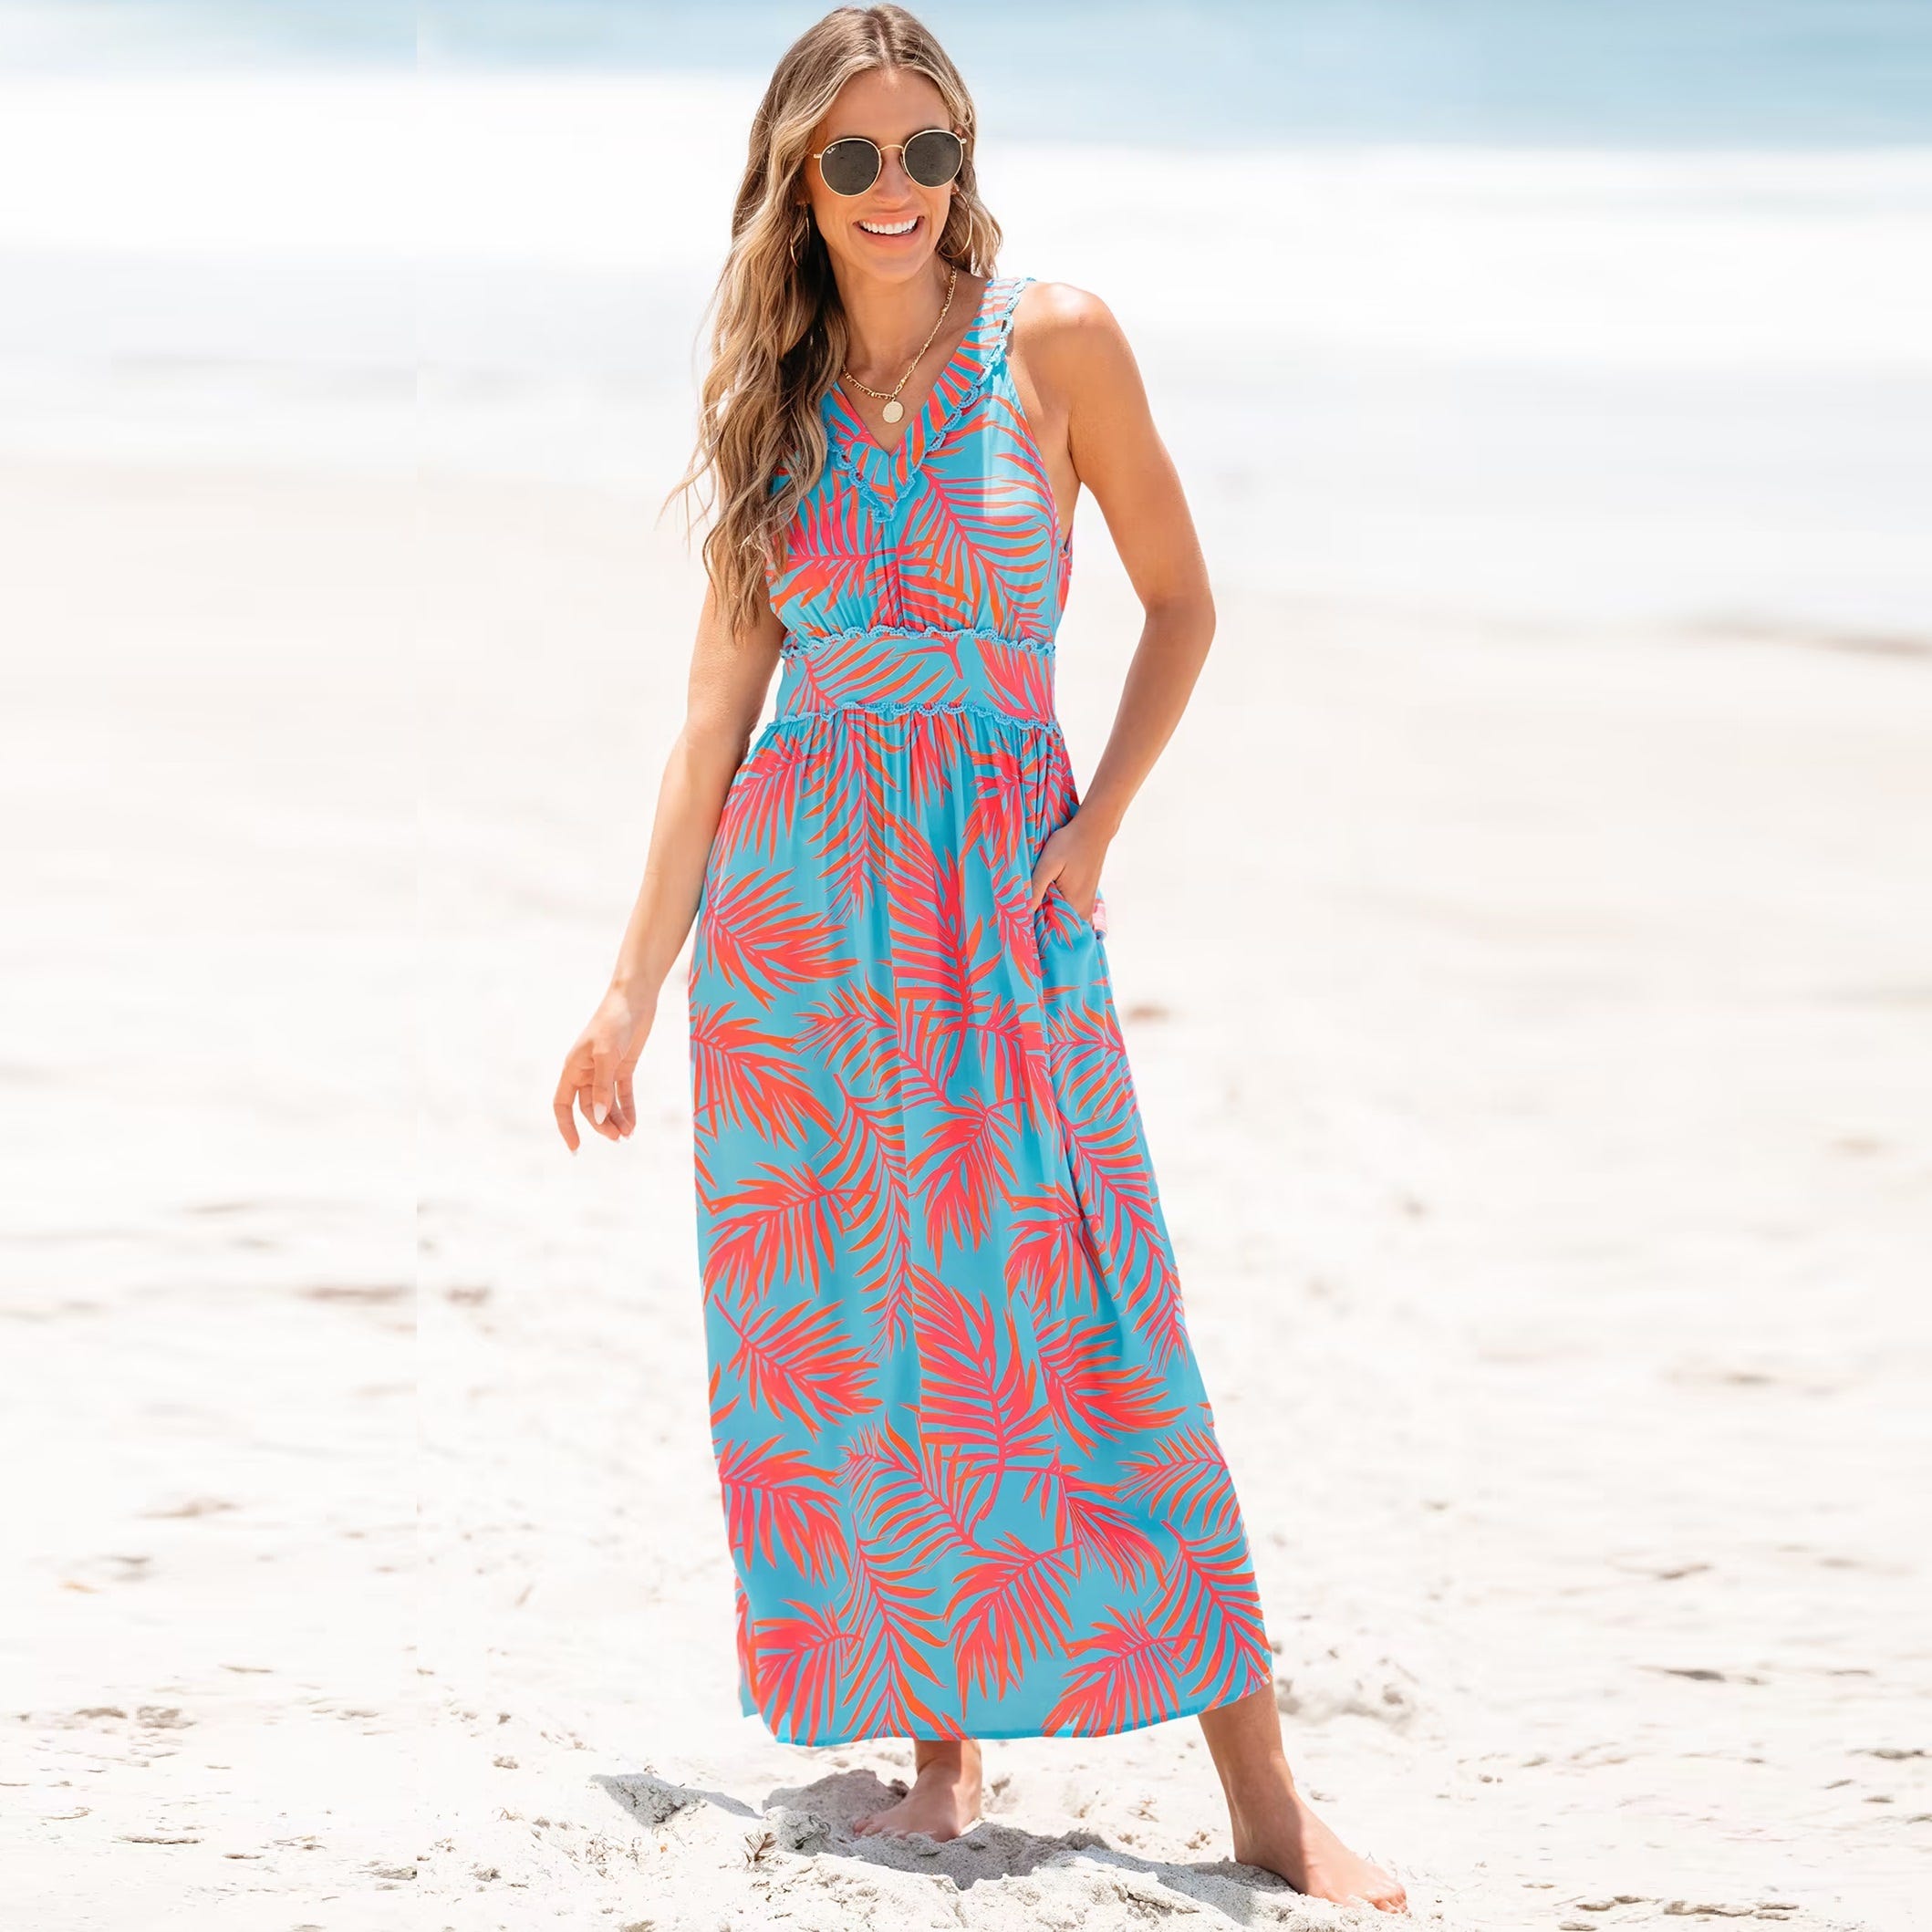 A woman on a beach wearing a sleeveless blue maxi dress with pink and red leaf patterns, paired with round sunglasses.